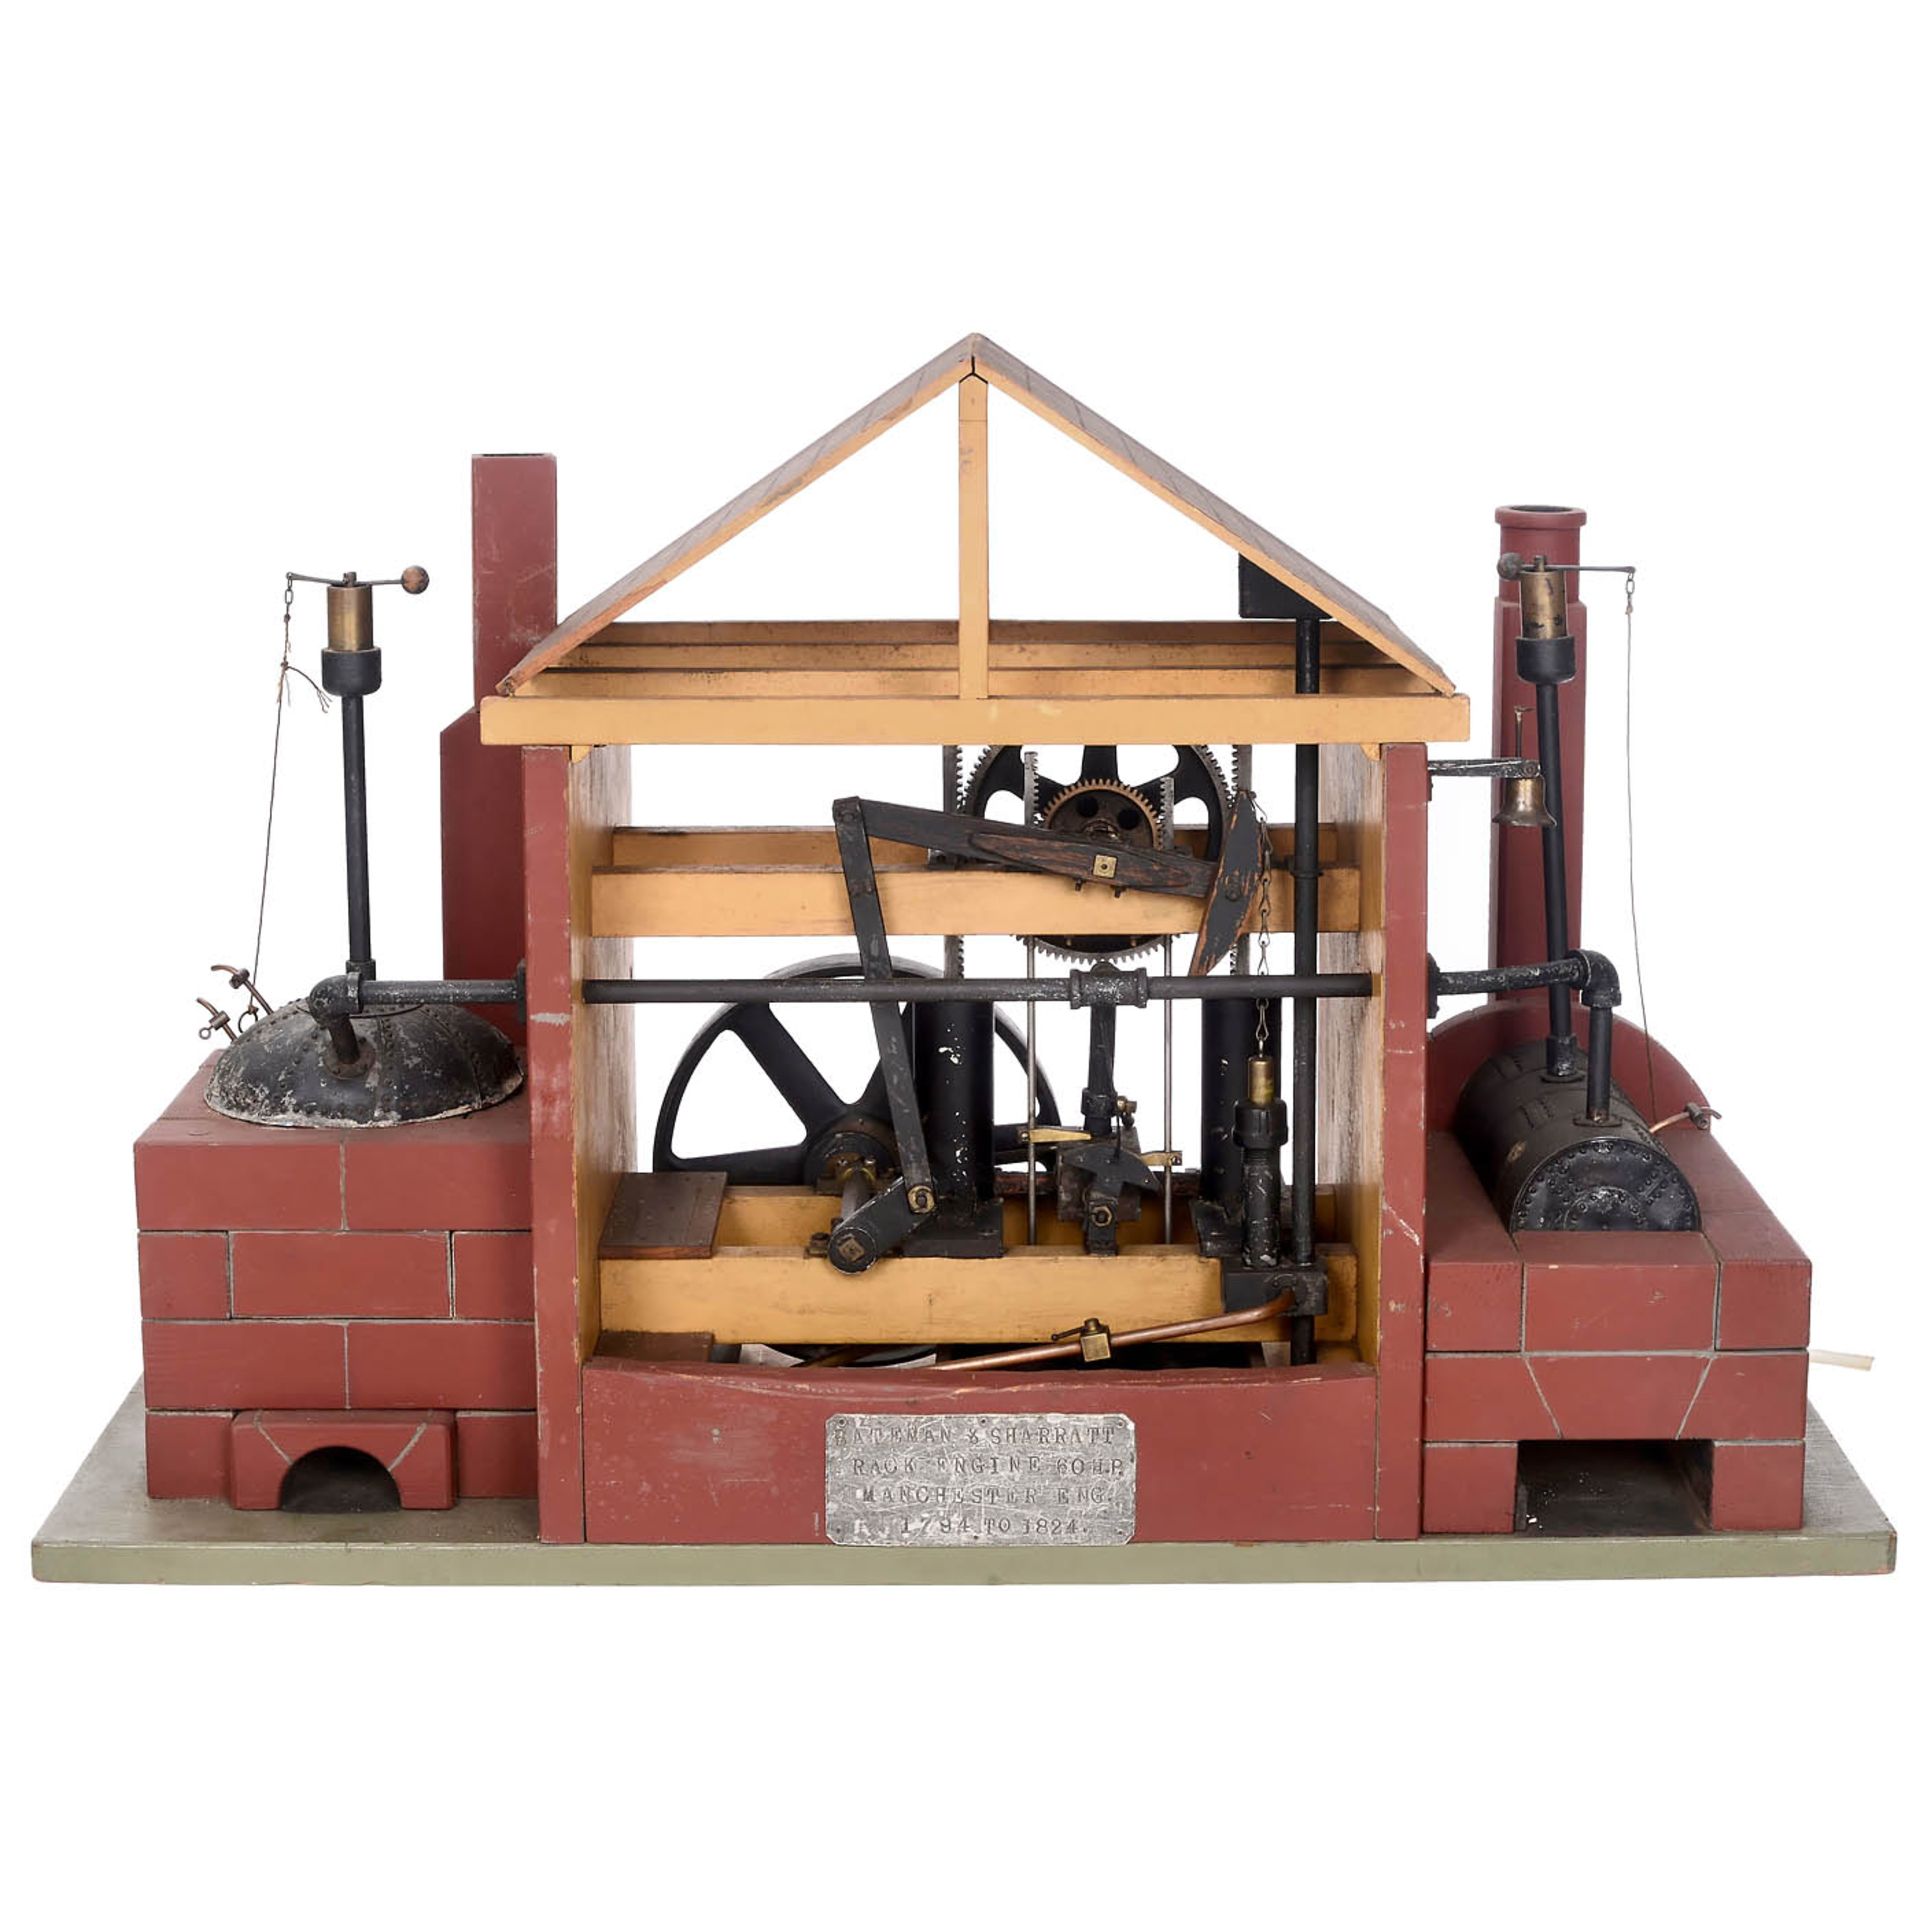 Twin-Cylinder Rack-Balancing Steam Engine with Boiler House, c. 1900 - Image 2 of 4